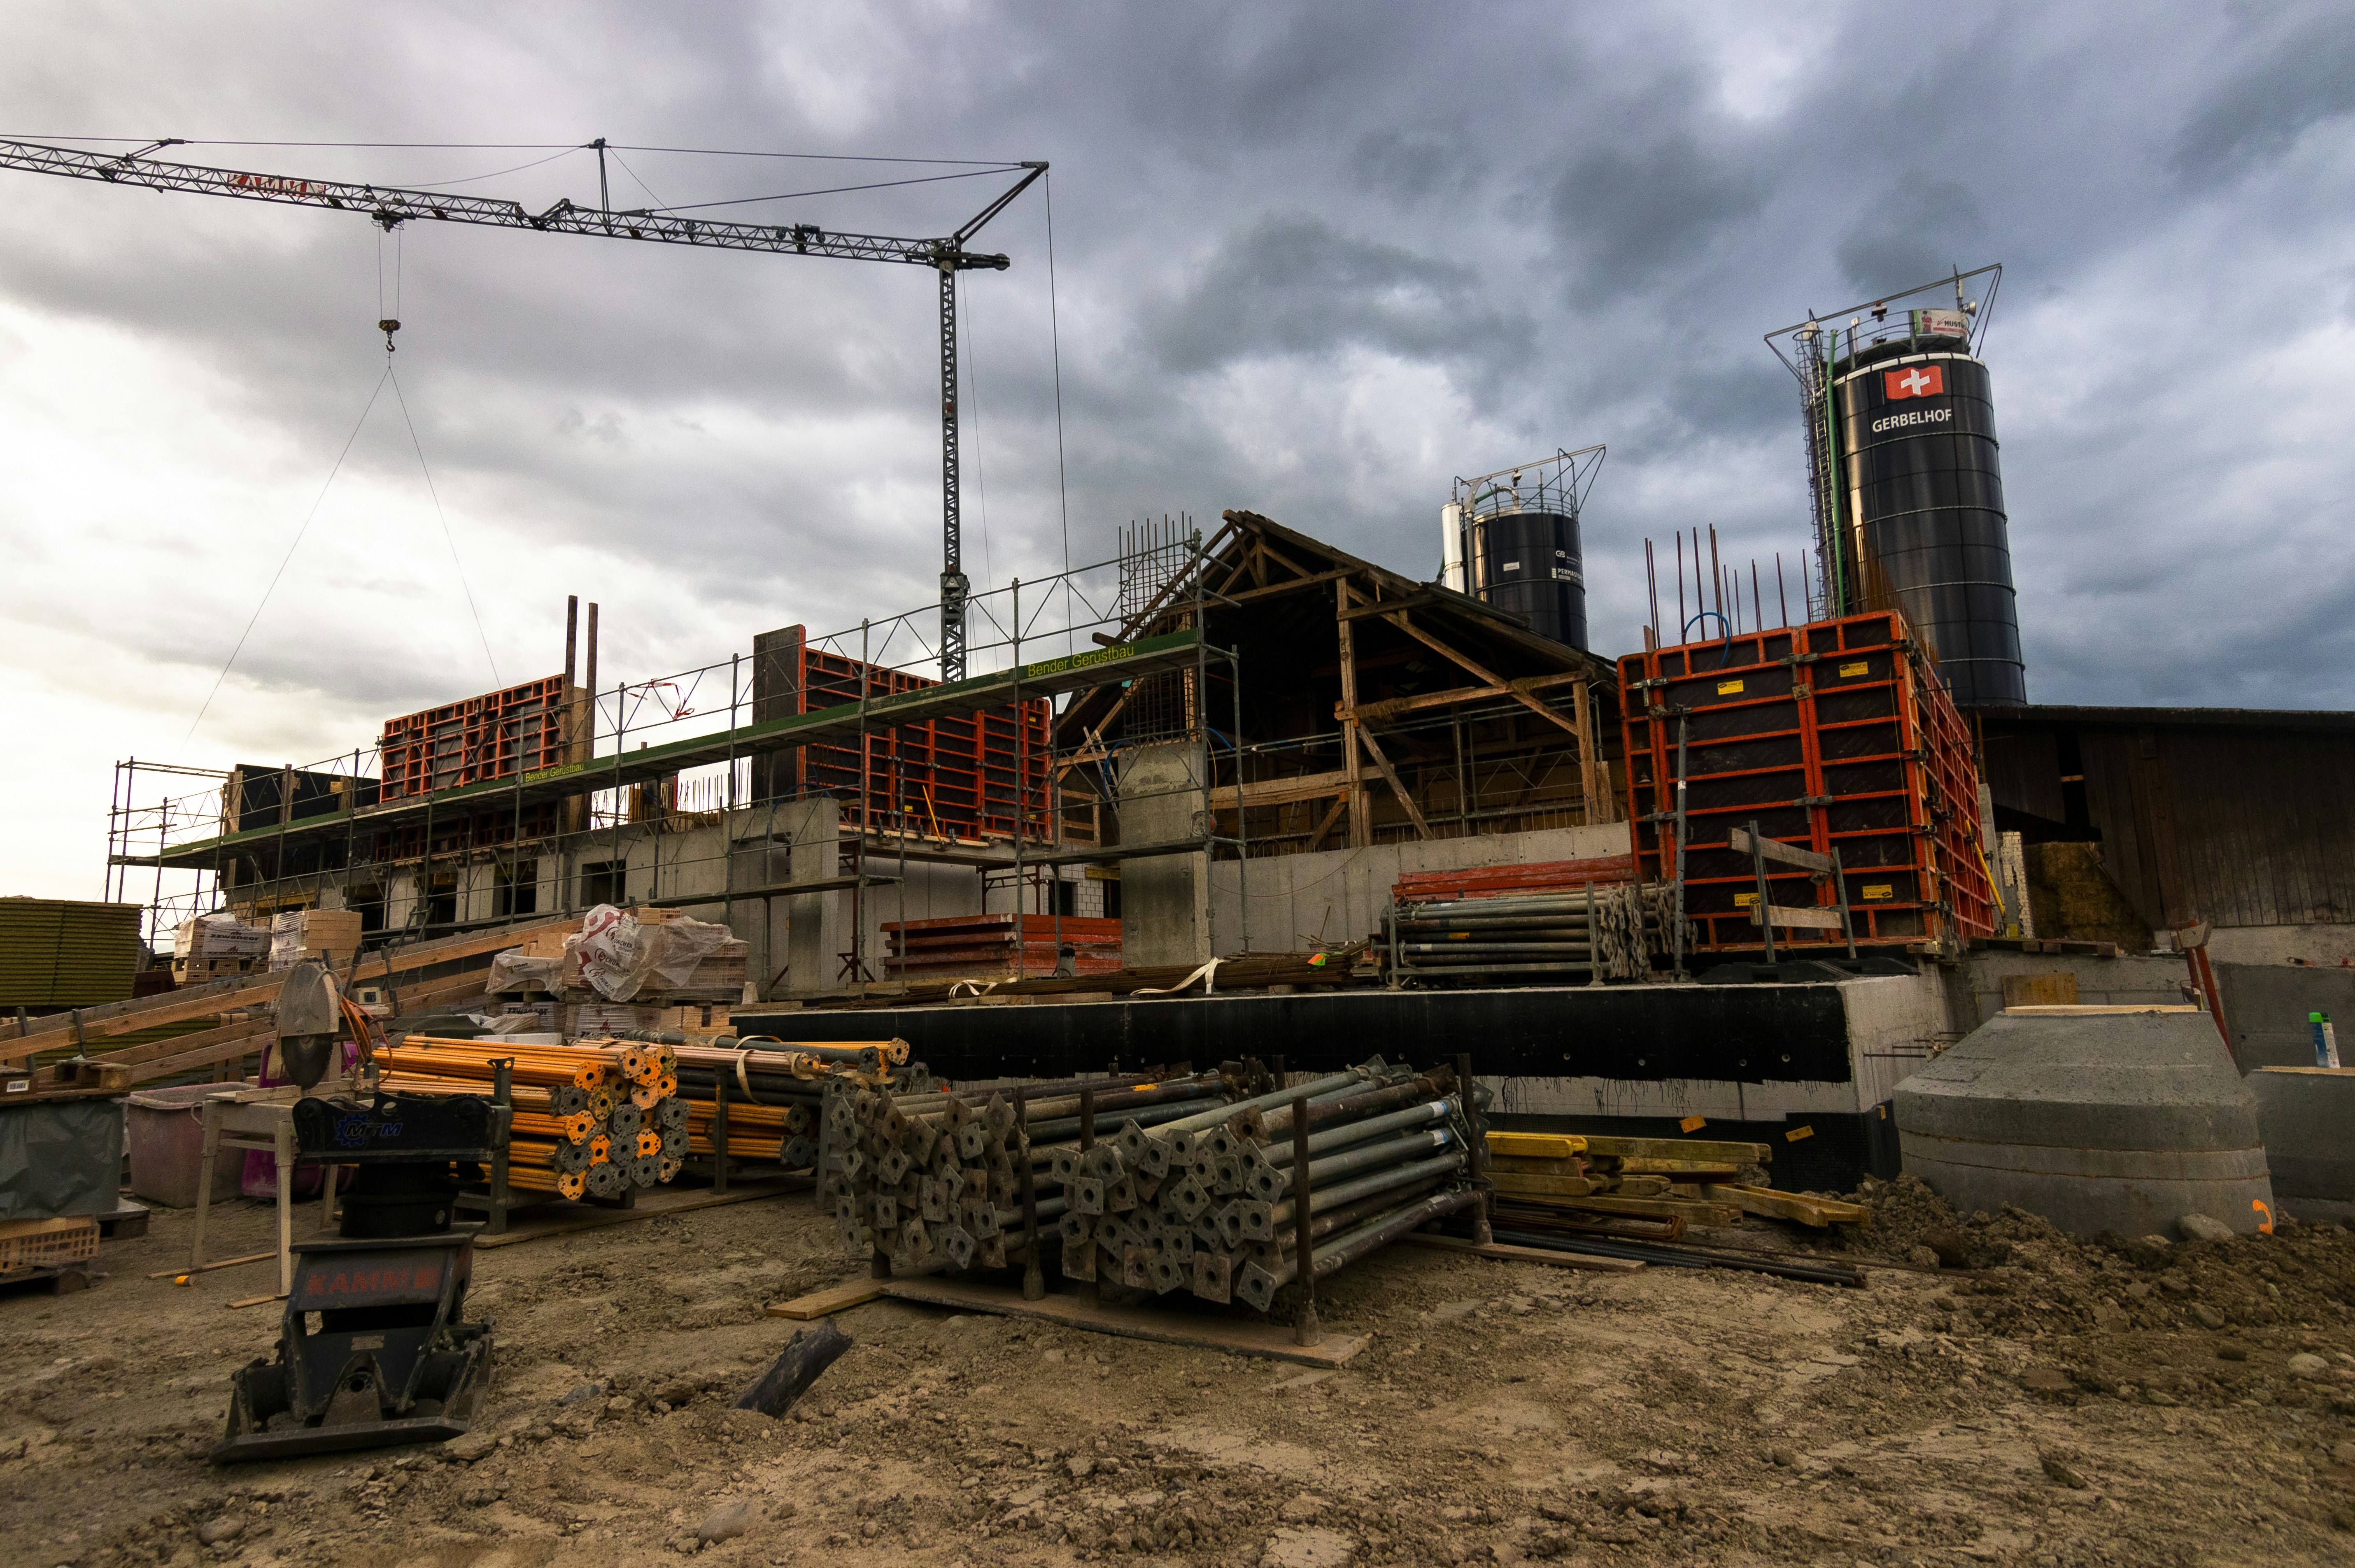 Panoramic view of building construction. Various pieces of form work, heaps of struts, scaffolding and other equipment.